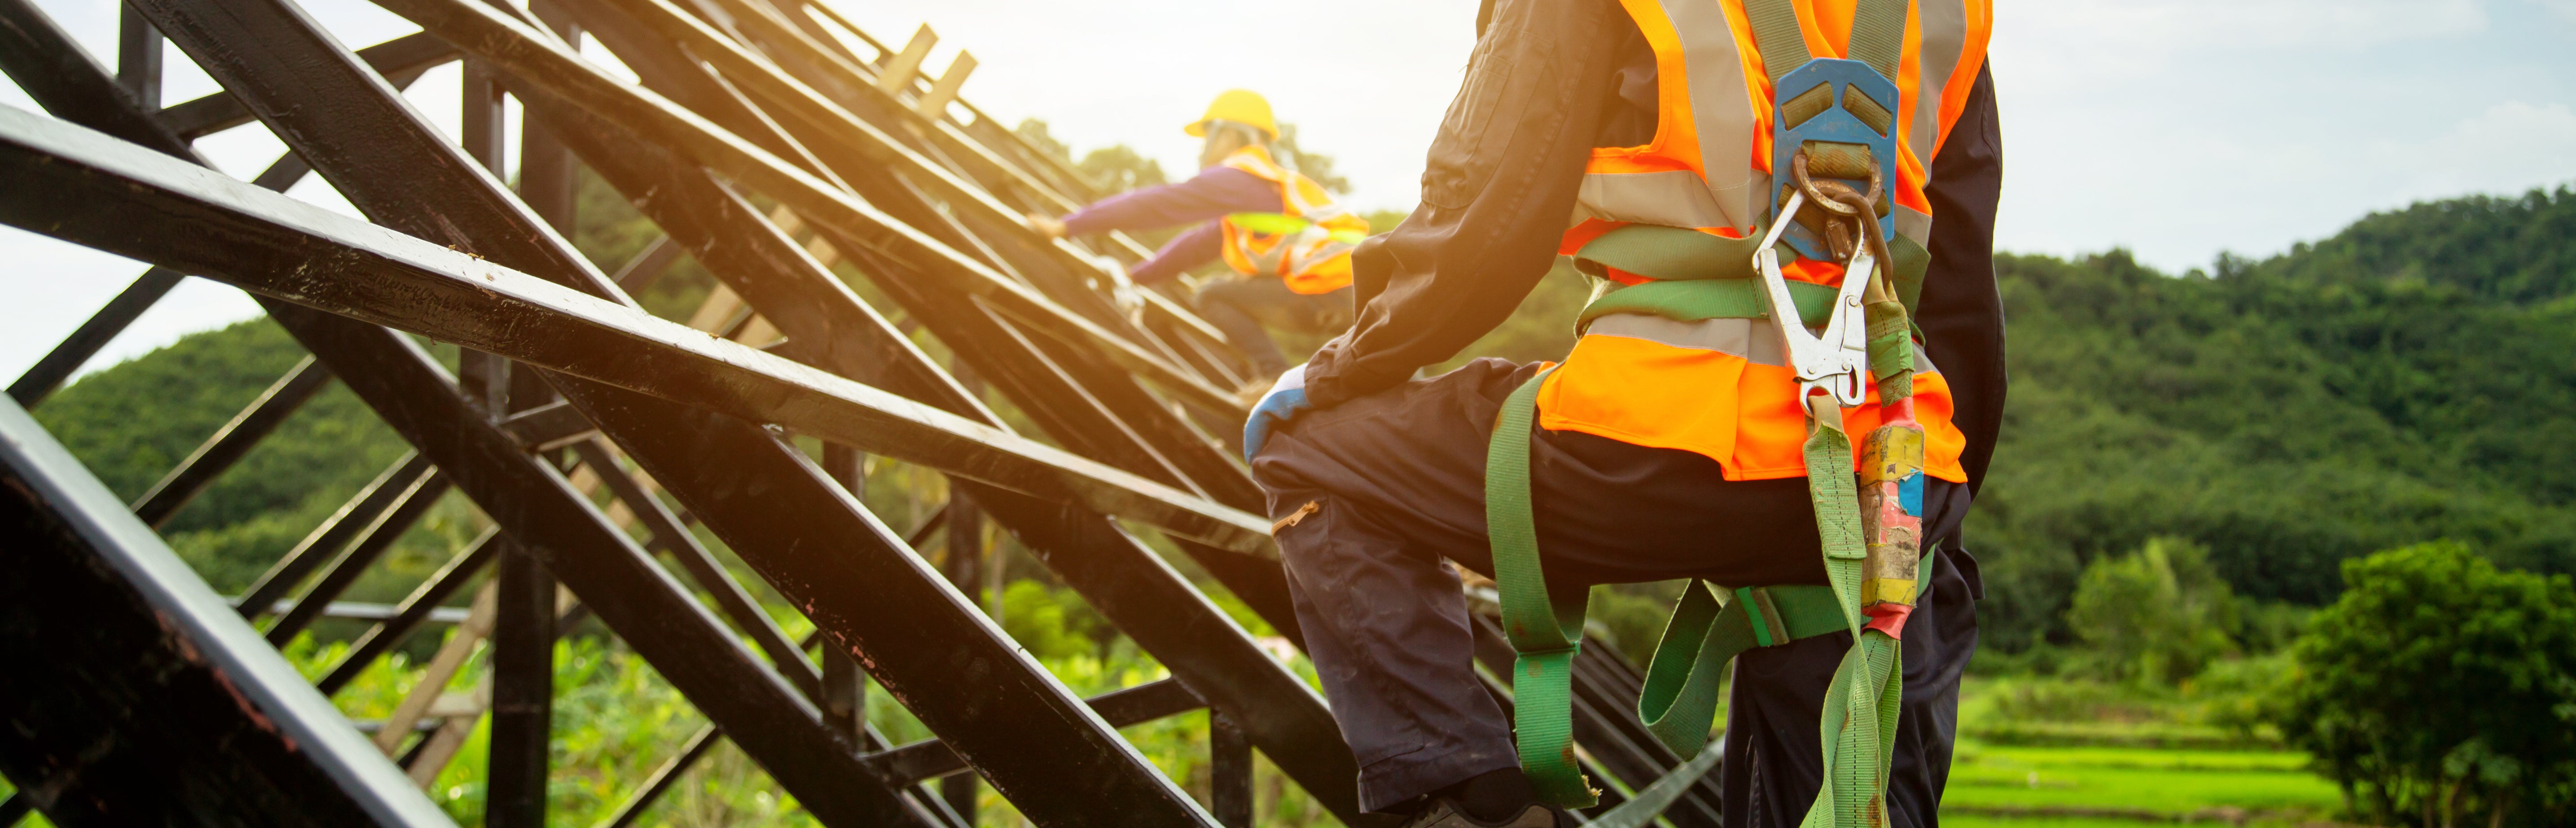 Understanding OSHA 1926.501(b): Simplified Explanation Of Employer Requirements For Working At Heights